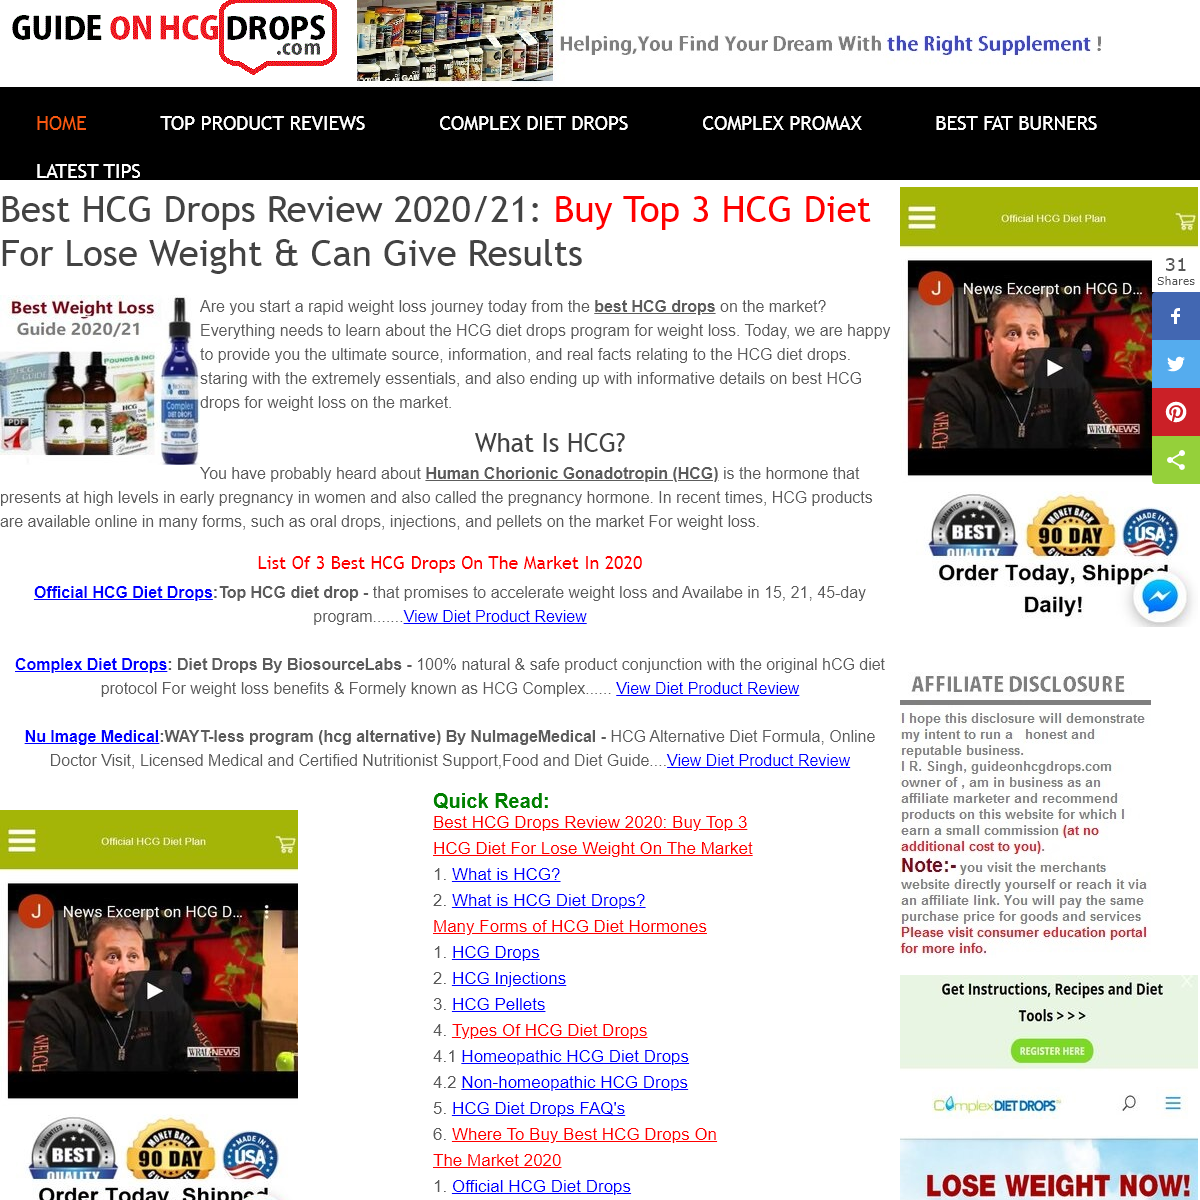 Best HCG Drops Review 2021- Top 3 HCG Diet For Lose Weight